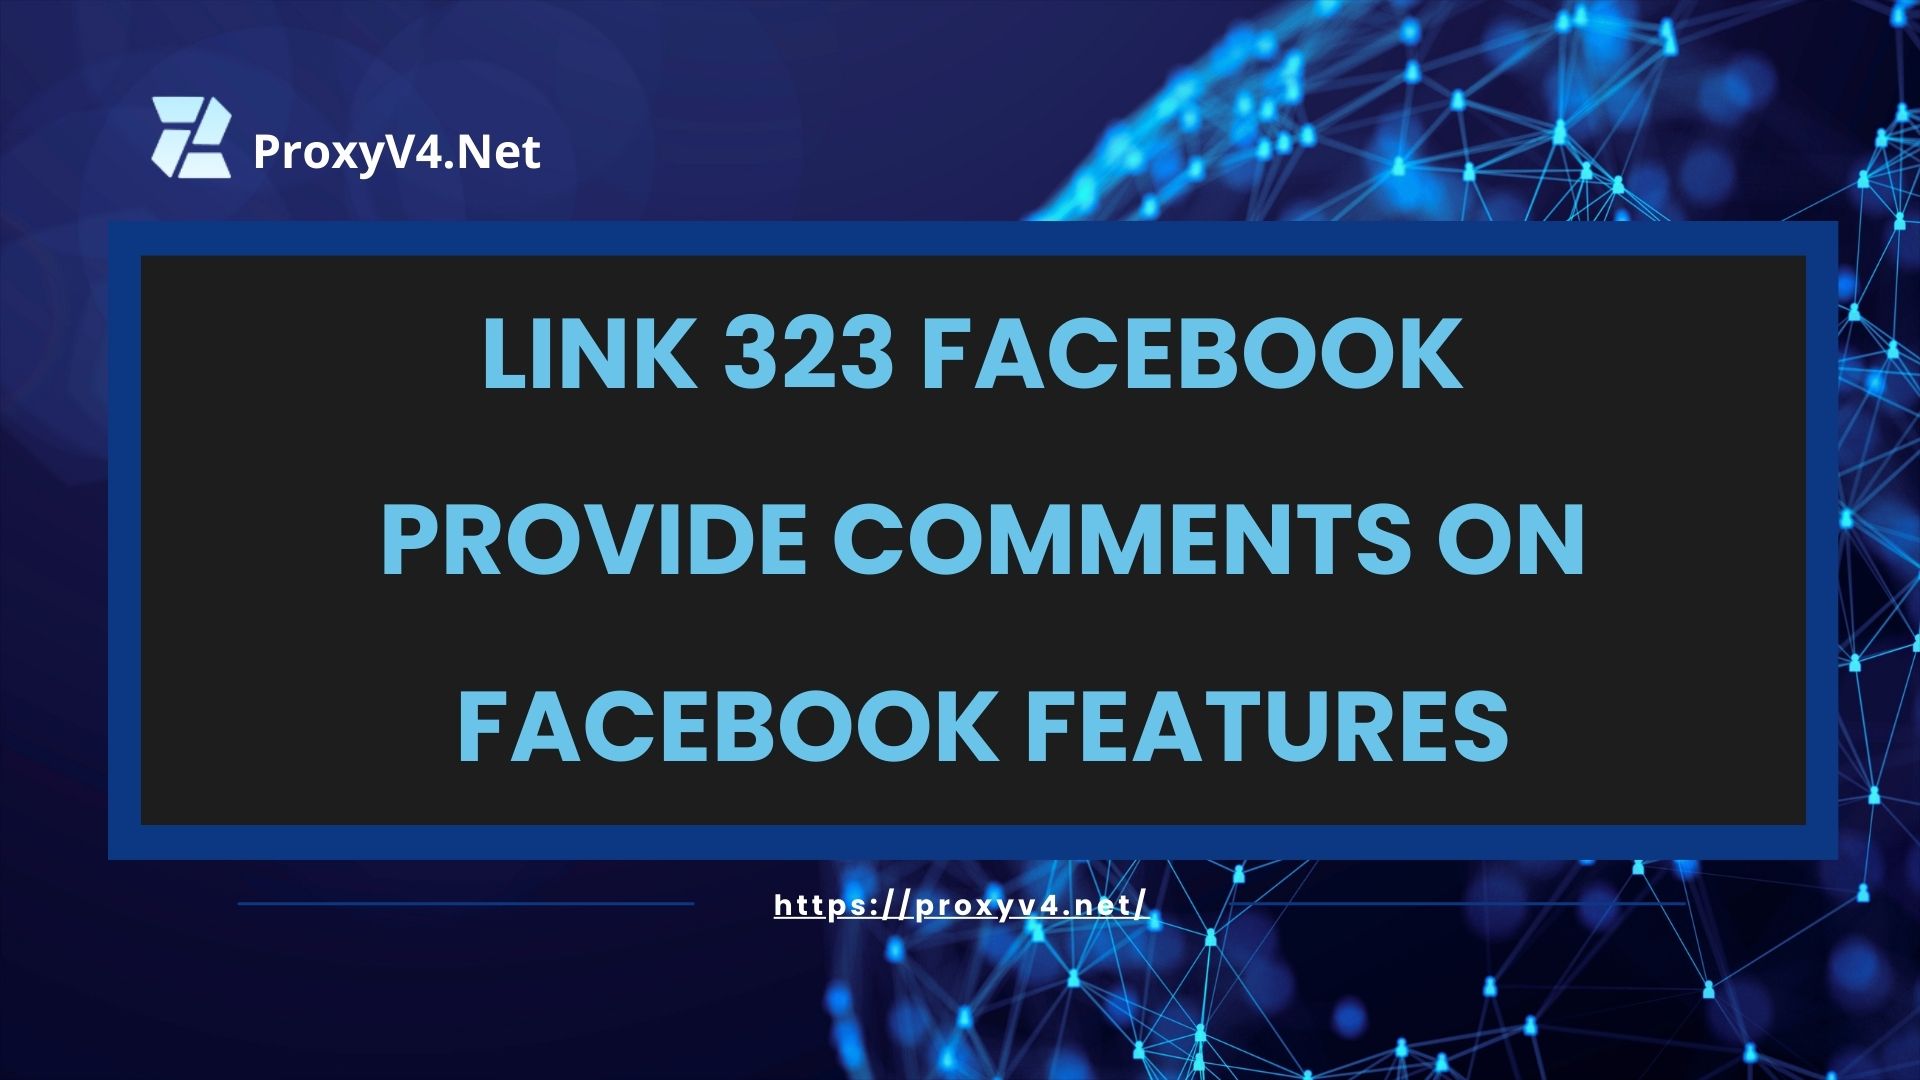 Link 323 Facebook - Provide comments on Facebook features